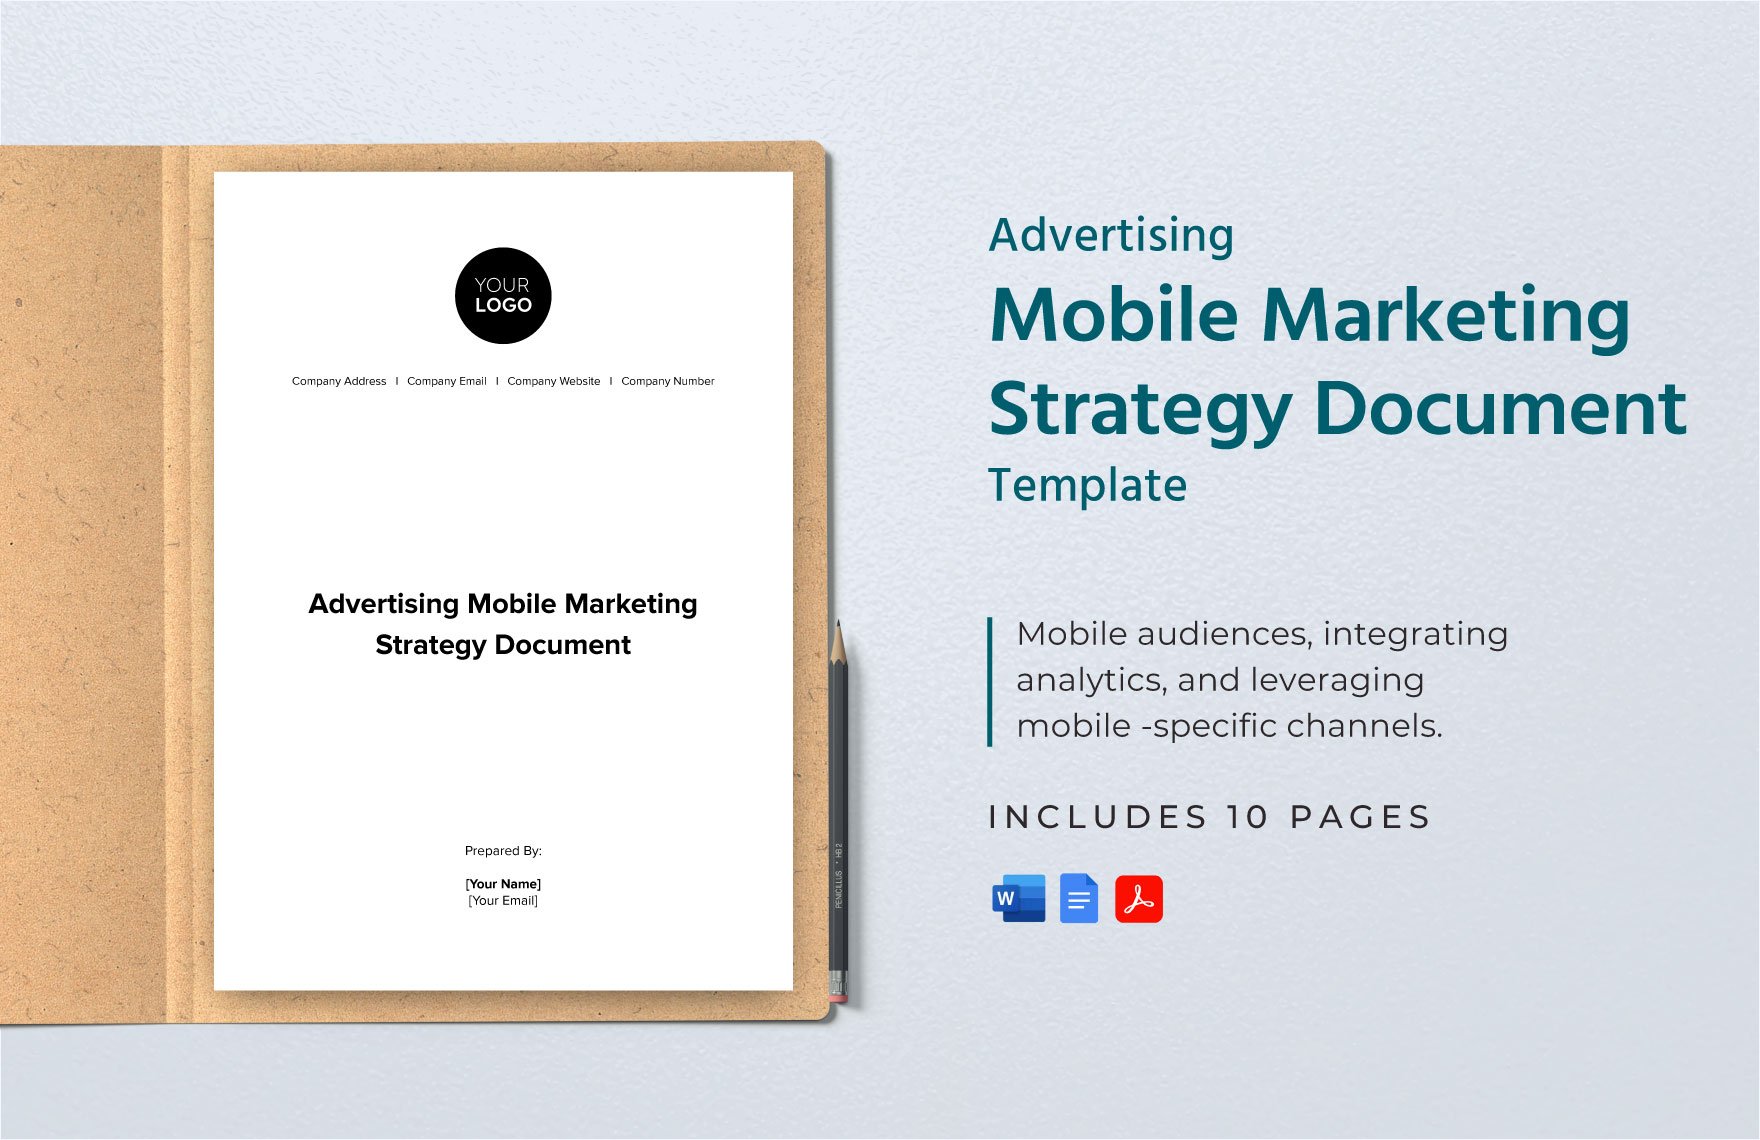 Advertising Mobile Marketing Strategy Document Template